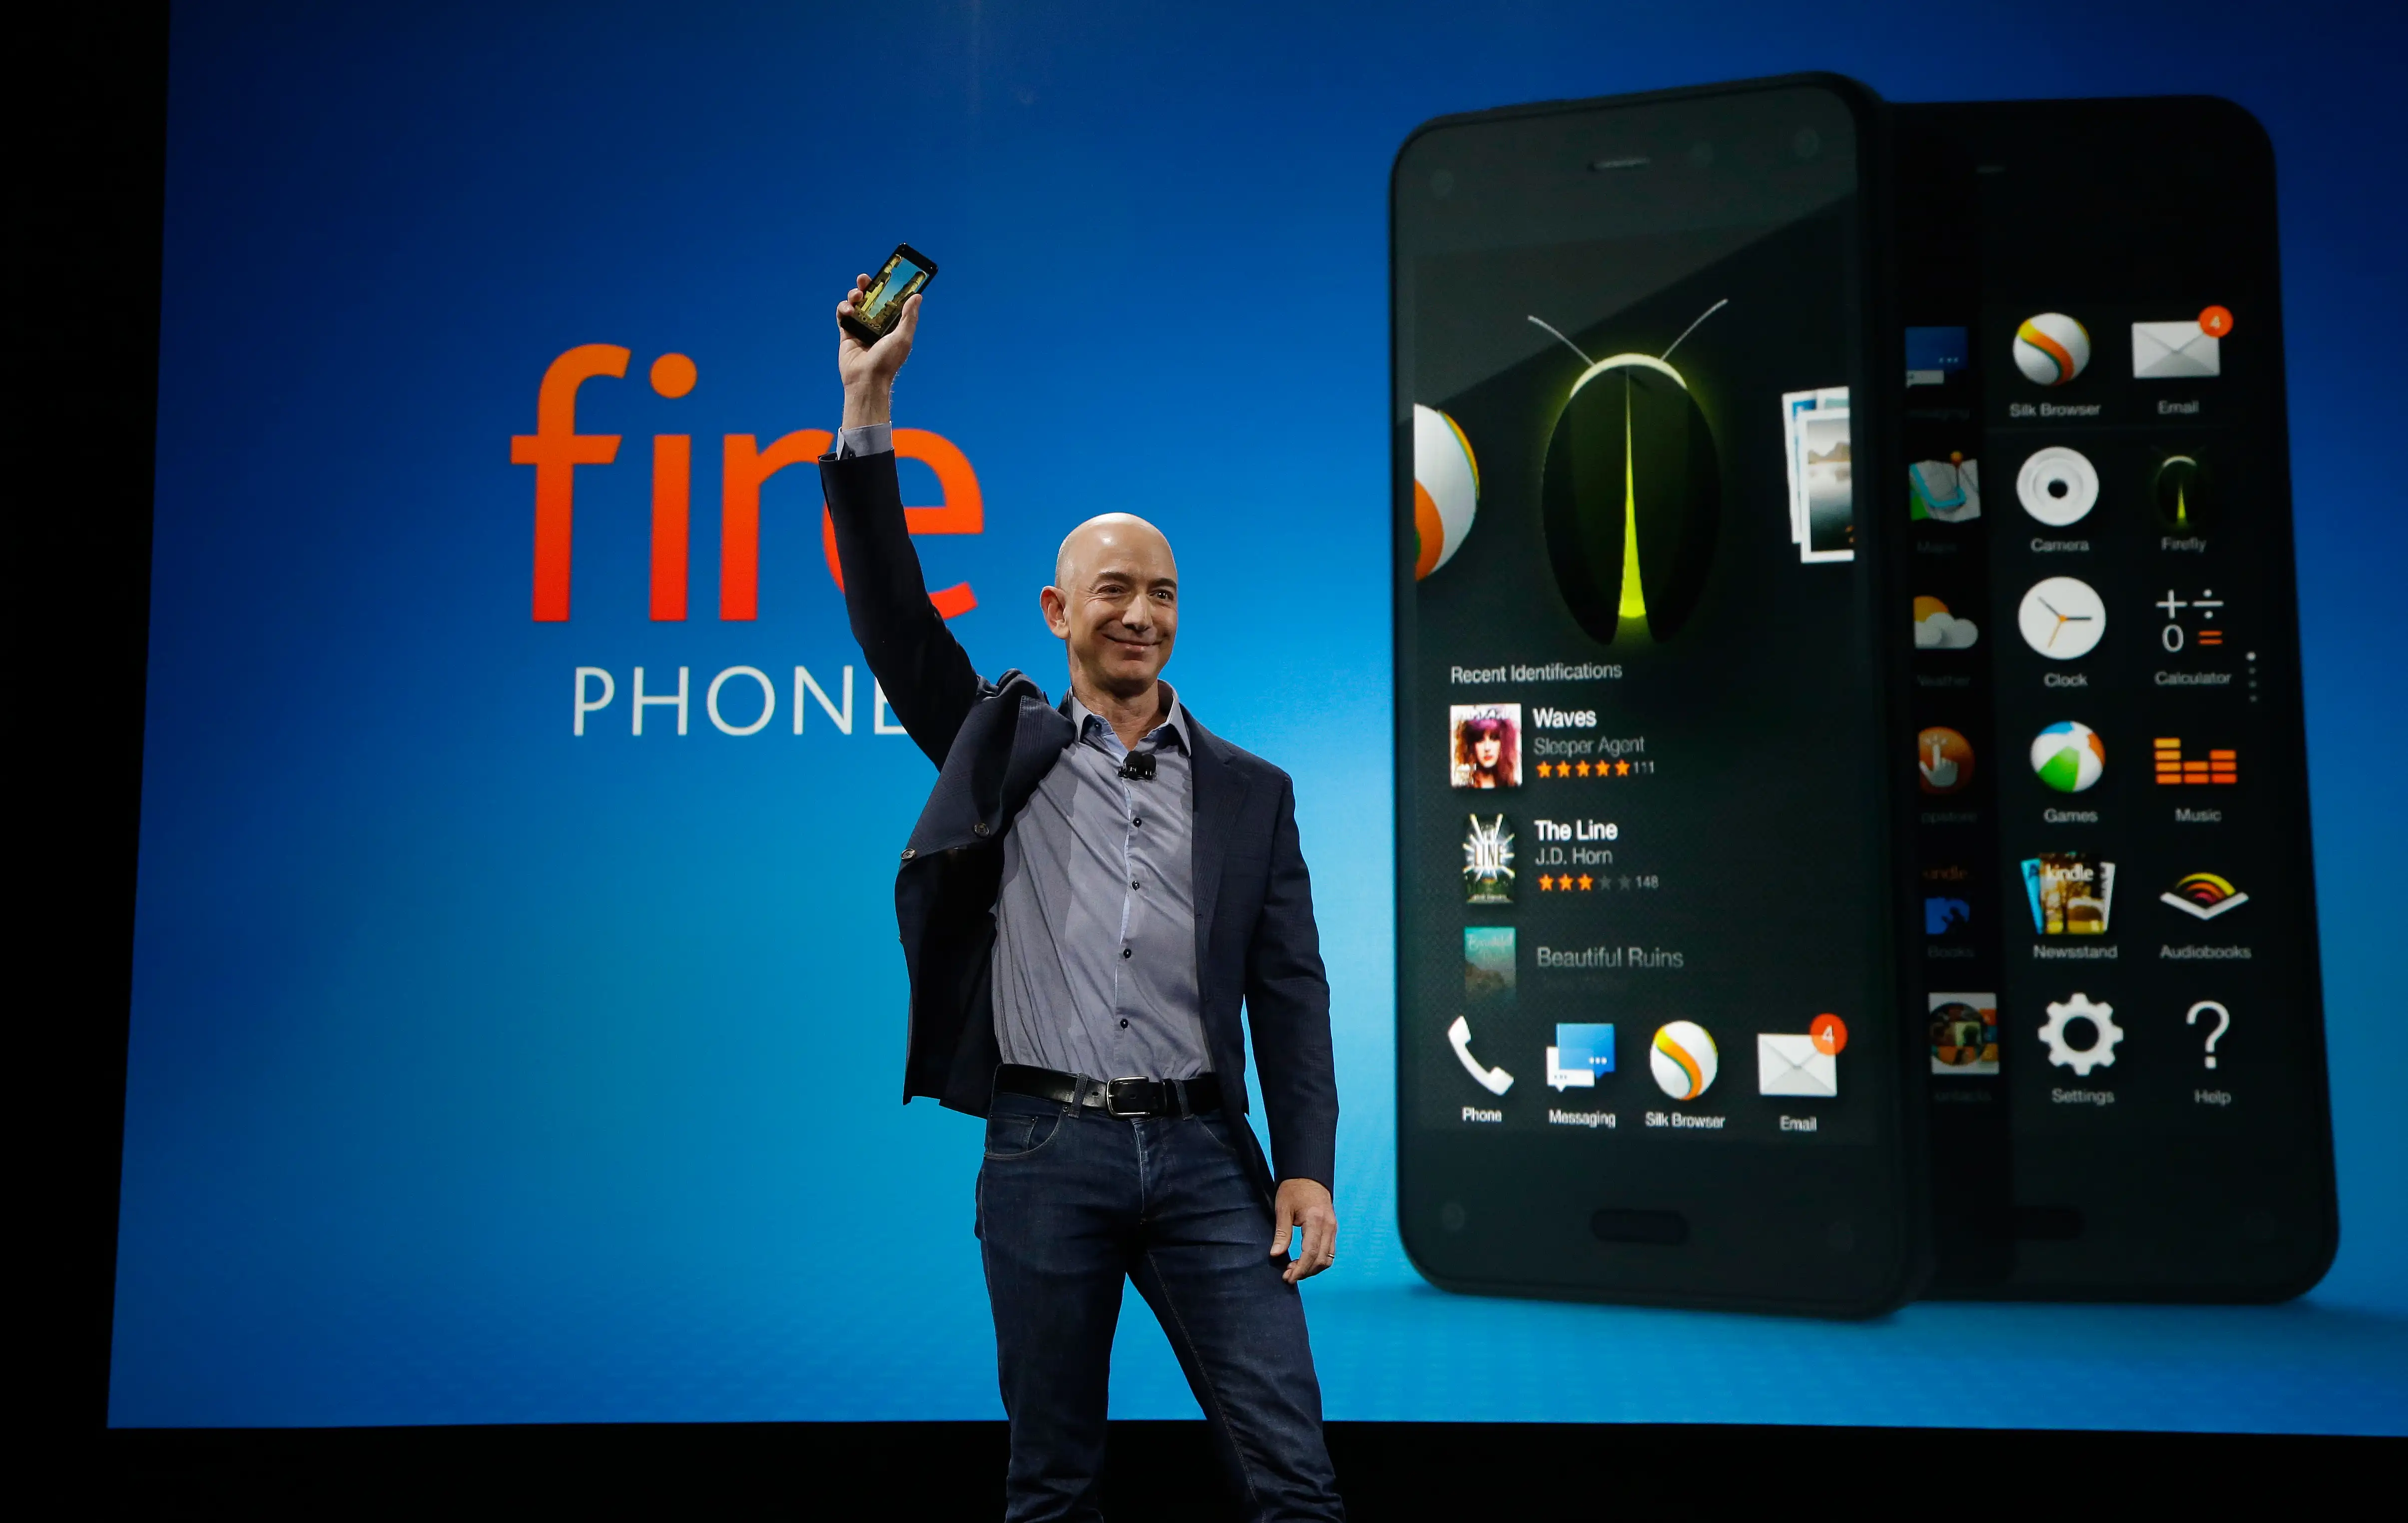 Amazon CEO Jeff Bezos holds up the new Amazon Fire Phone at a launch event, Wednesday, June 18, 2014, in Seattle.